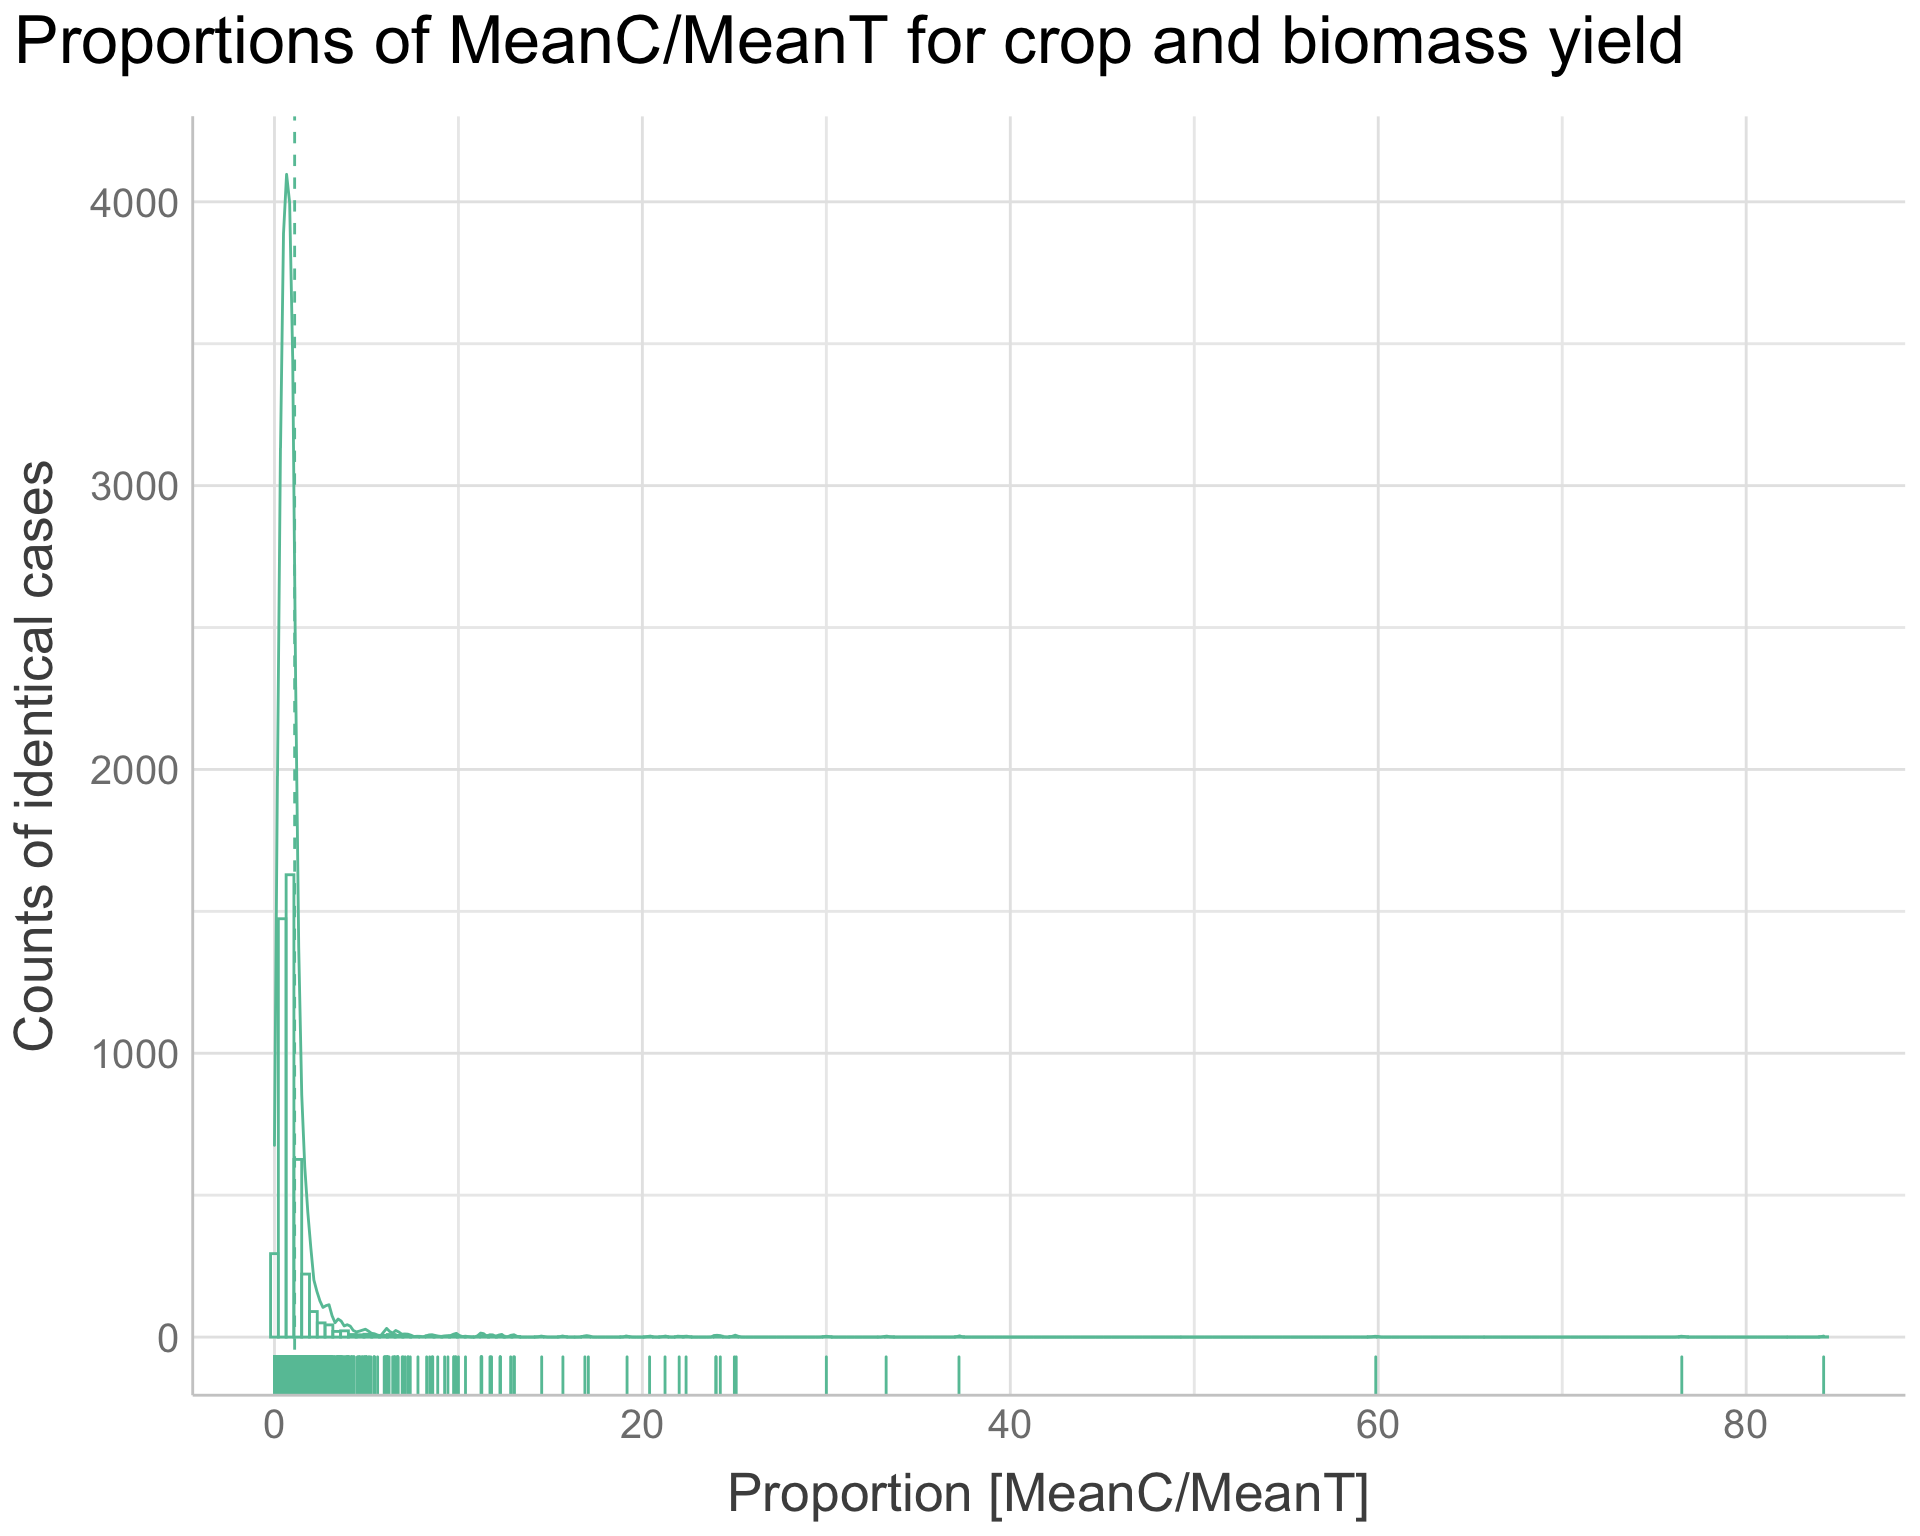 Proportions of MeanC/MeanT for crop and biomass yield